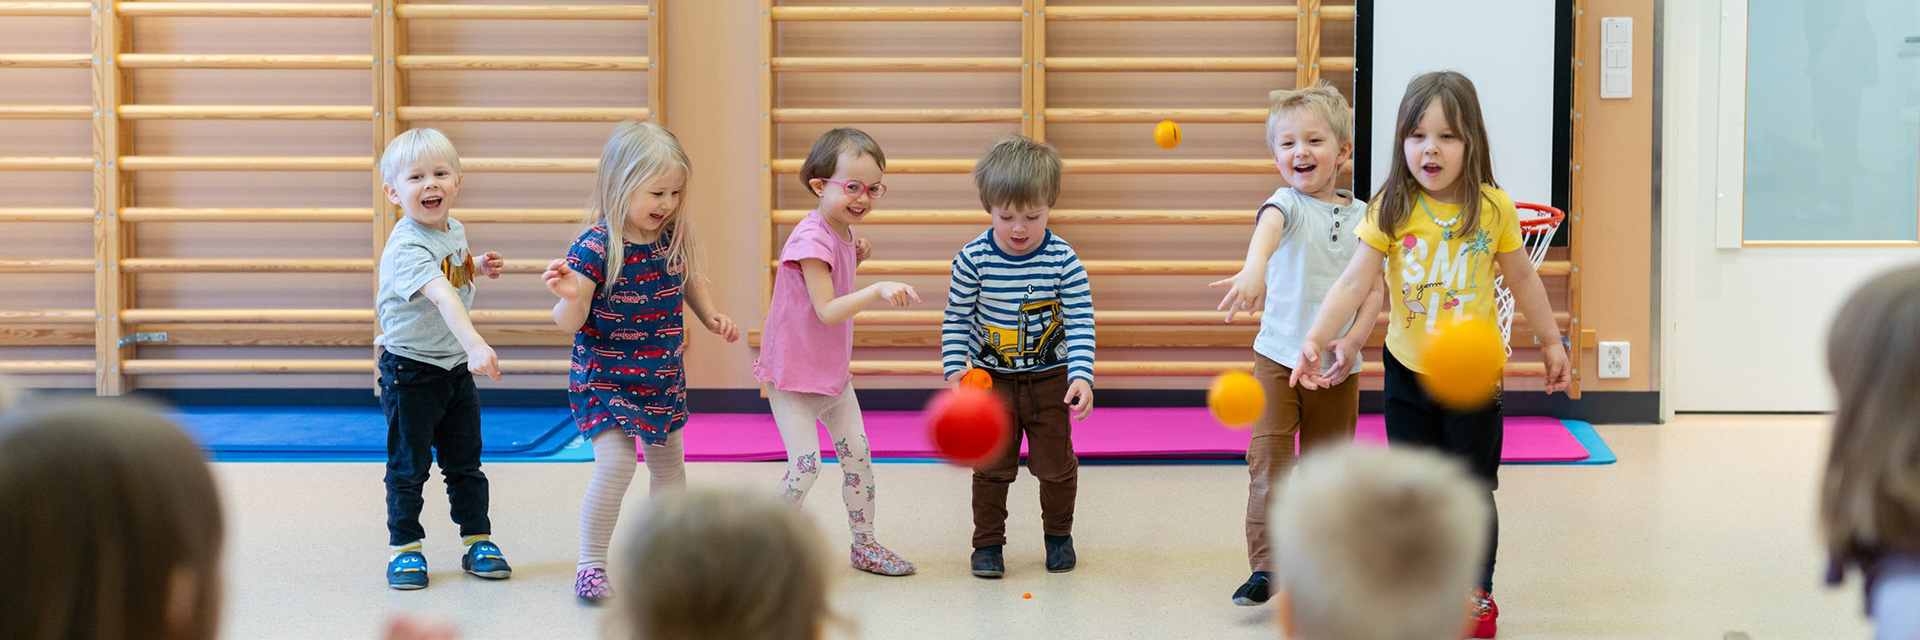 The children are playing with balls in the gymnasium.